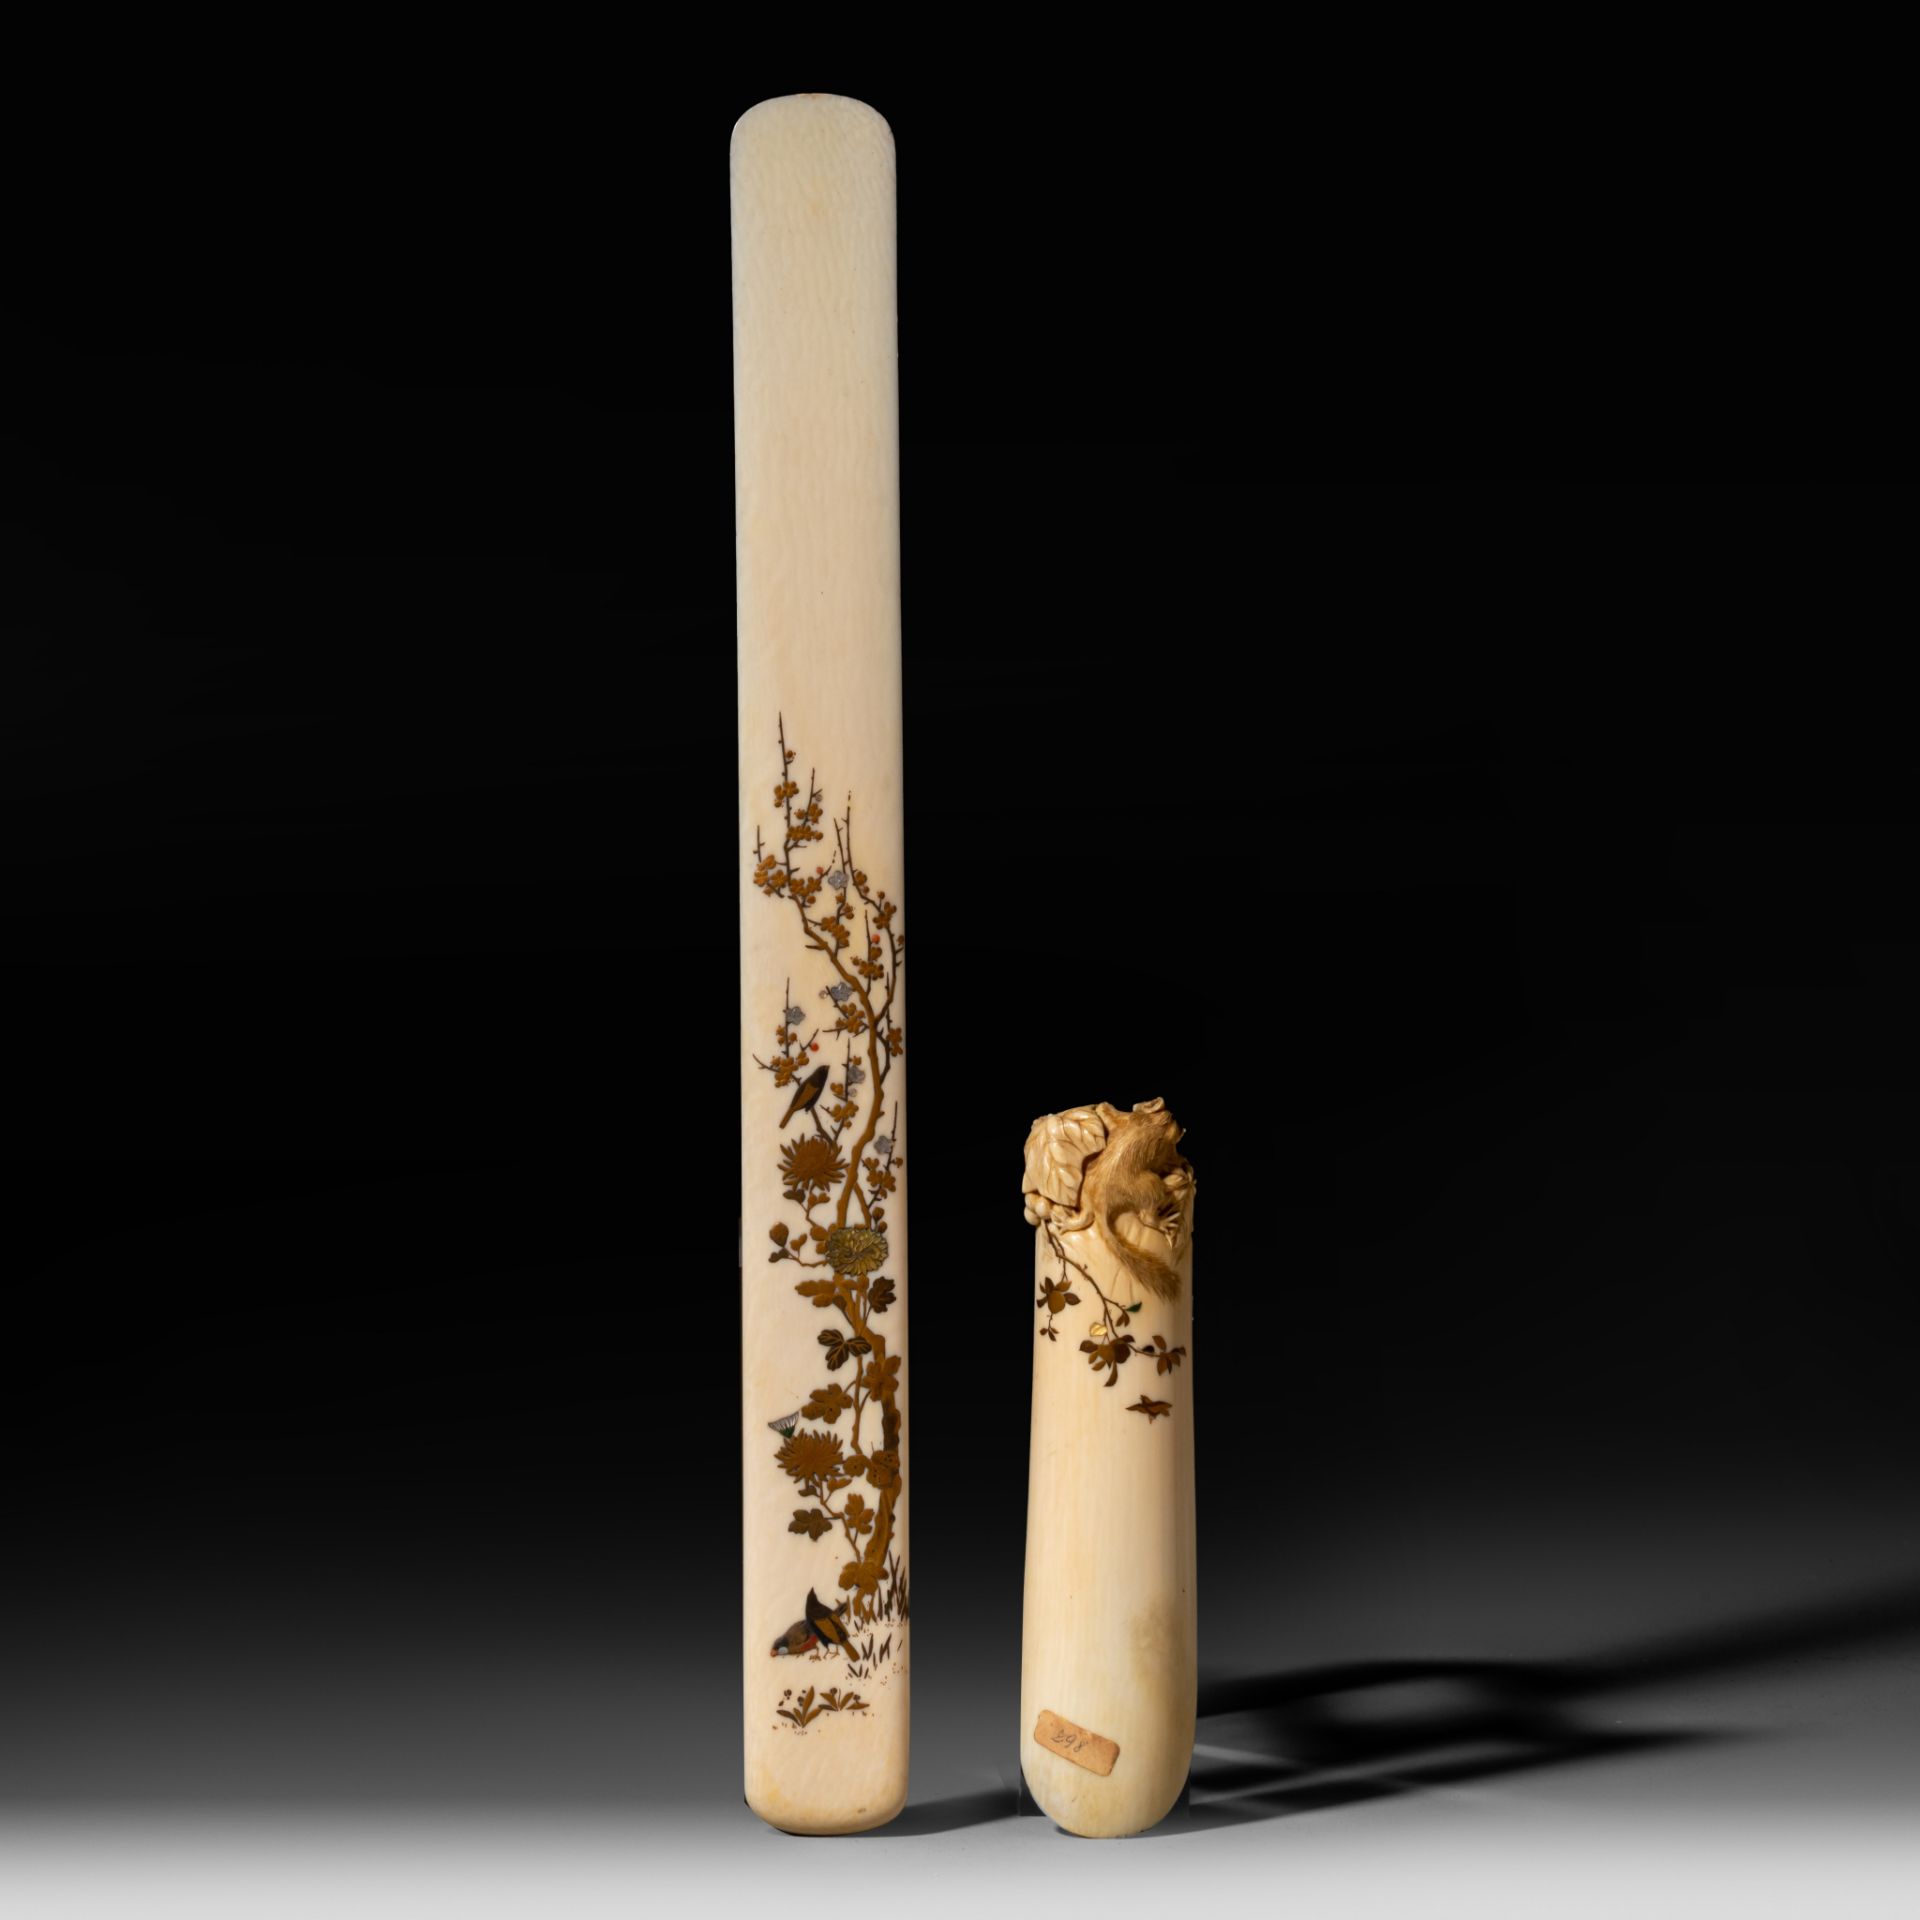 A very fine sculpted Japanese Meiji Period ivory Shibayama decorated shoe horn, L 17,3 cm - 52 g